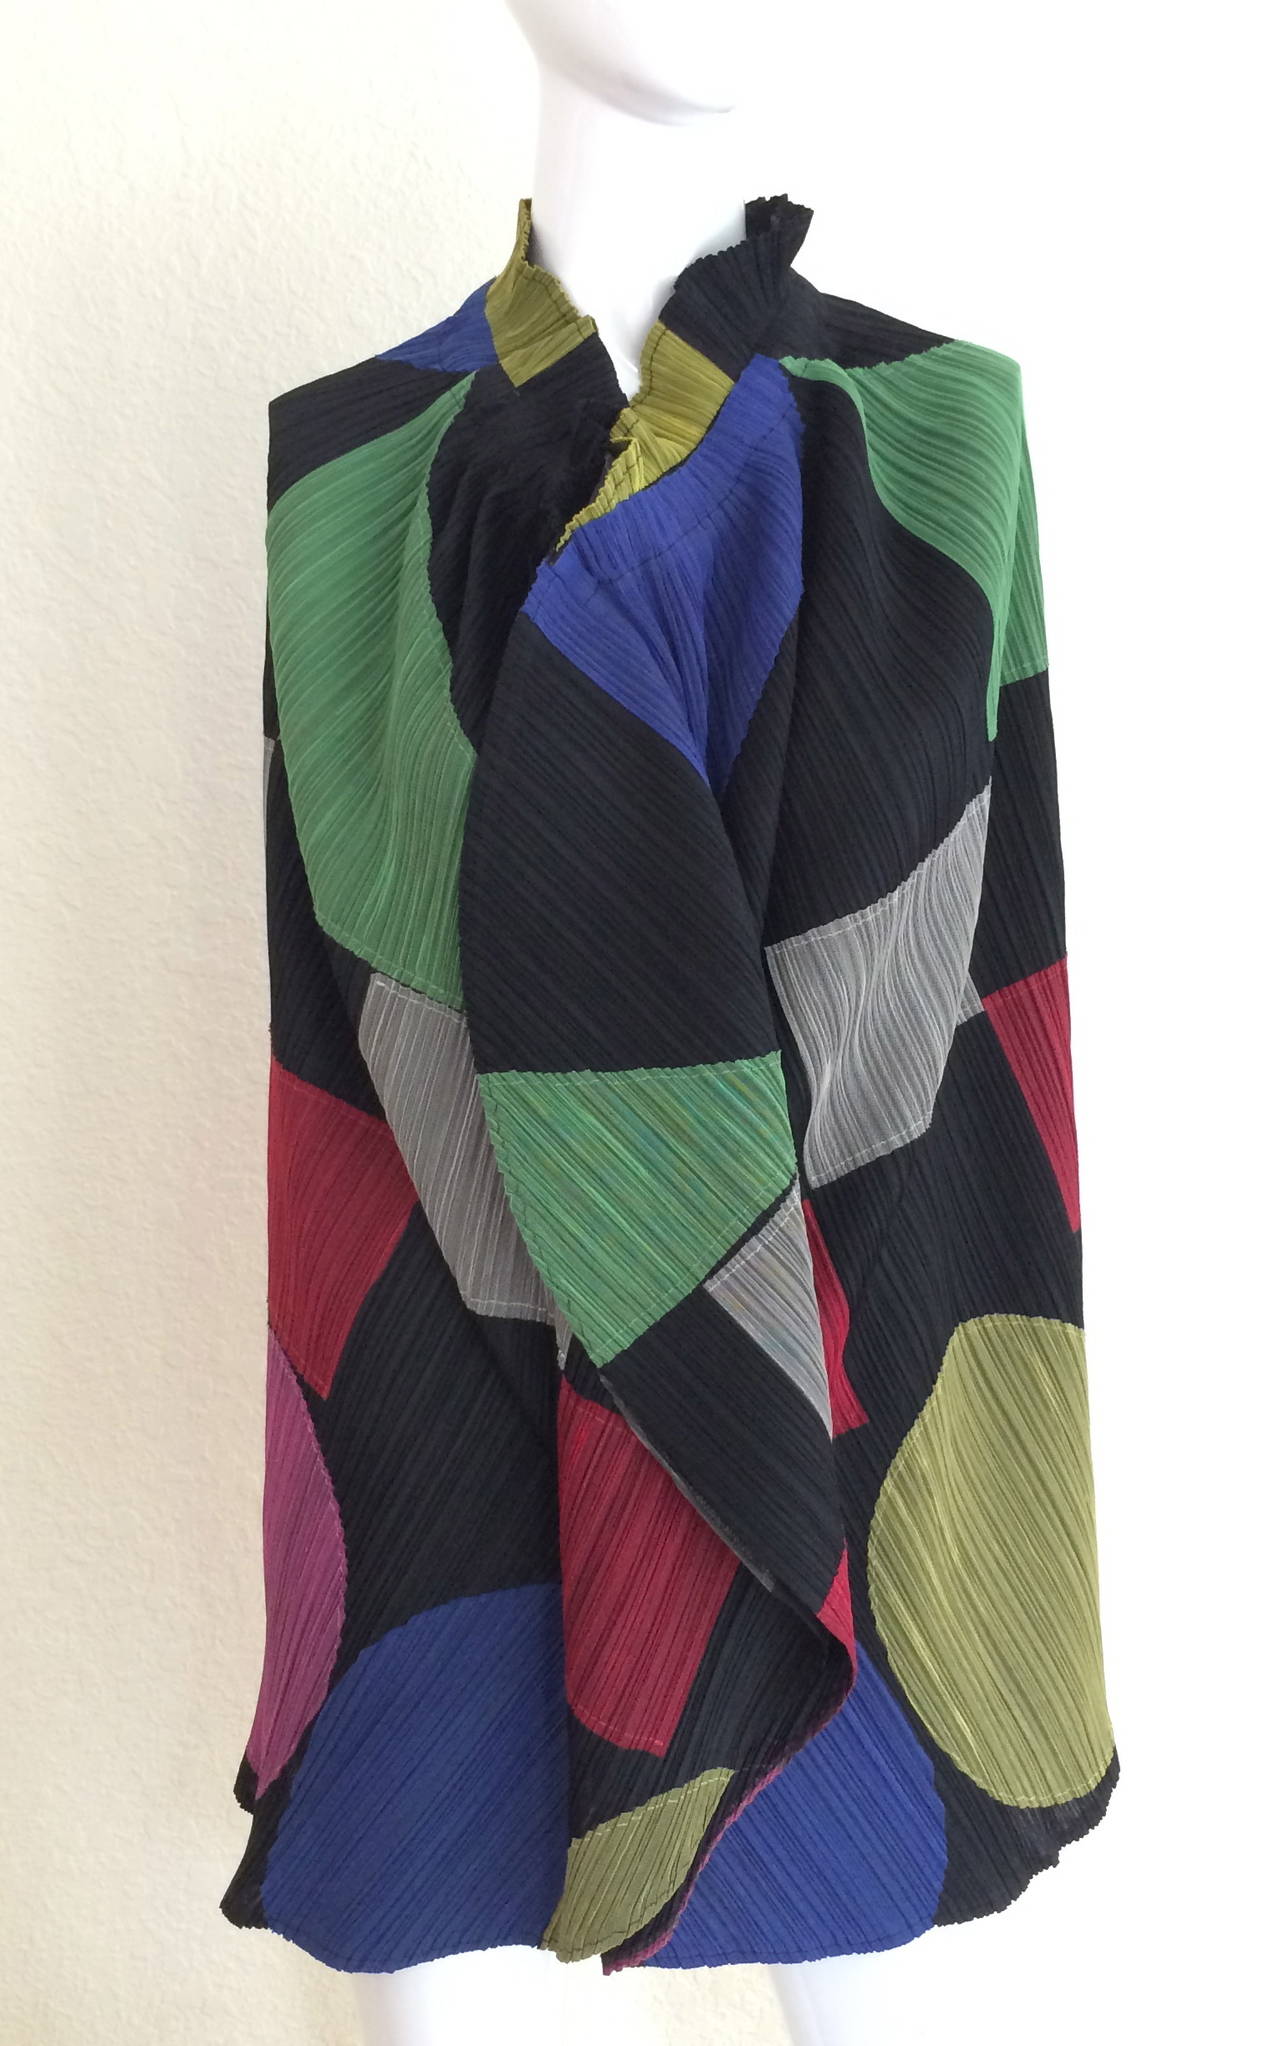  Issey Miyake Pleats Please Sculptural Color Block Skirt / Cape 1990s In Excellent Condition For Sale In Boca Raton, FL